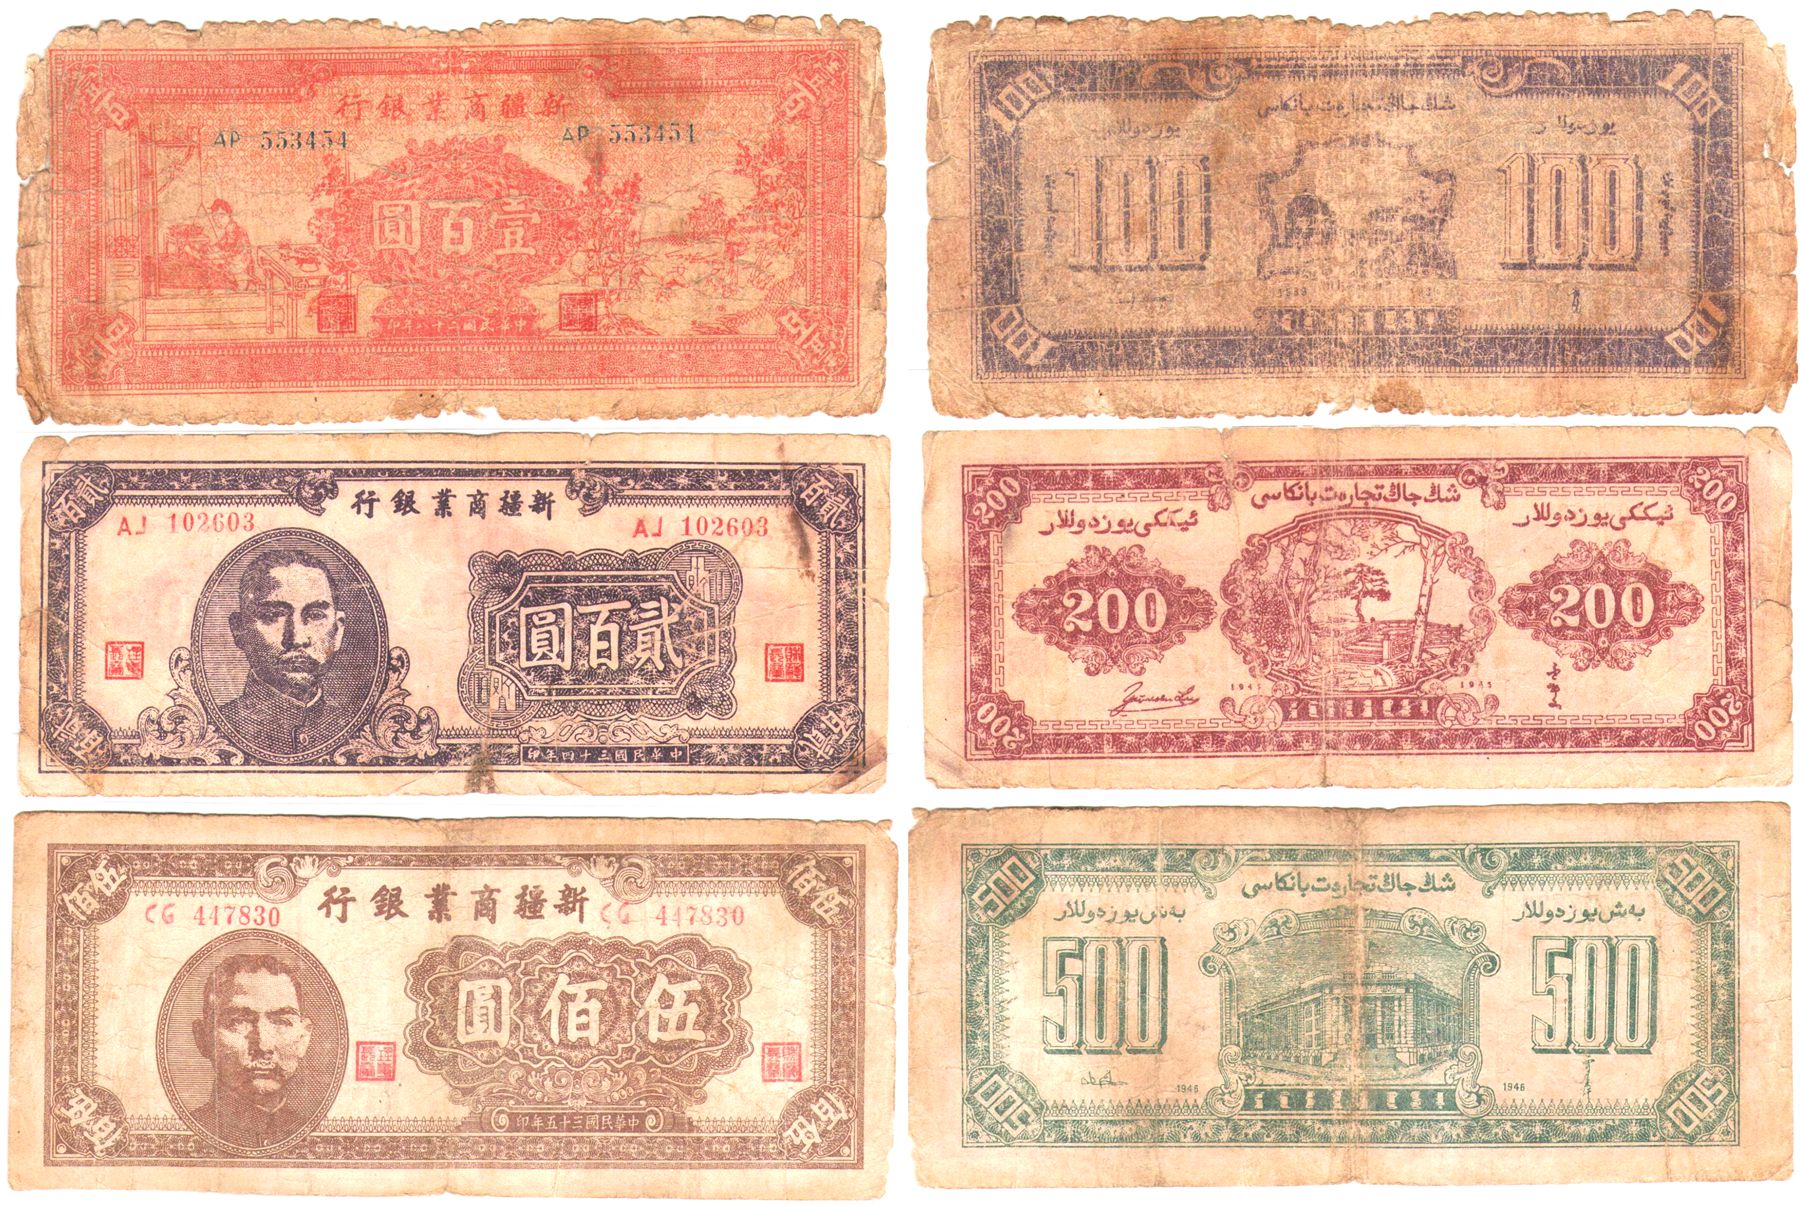 XJ0196, Sinkiang Commercial Bank Banknotes, 5 Pcs Wholesale, Fine 1940's